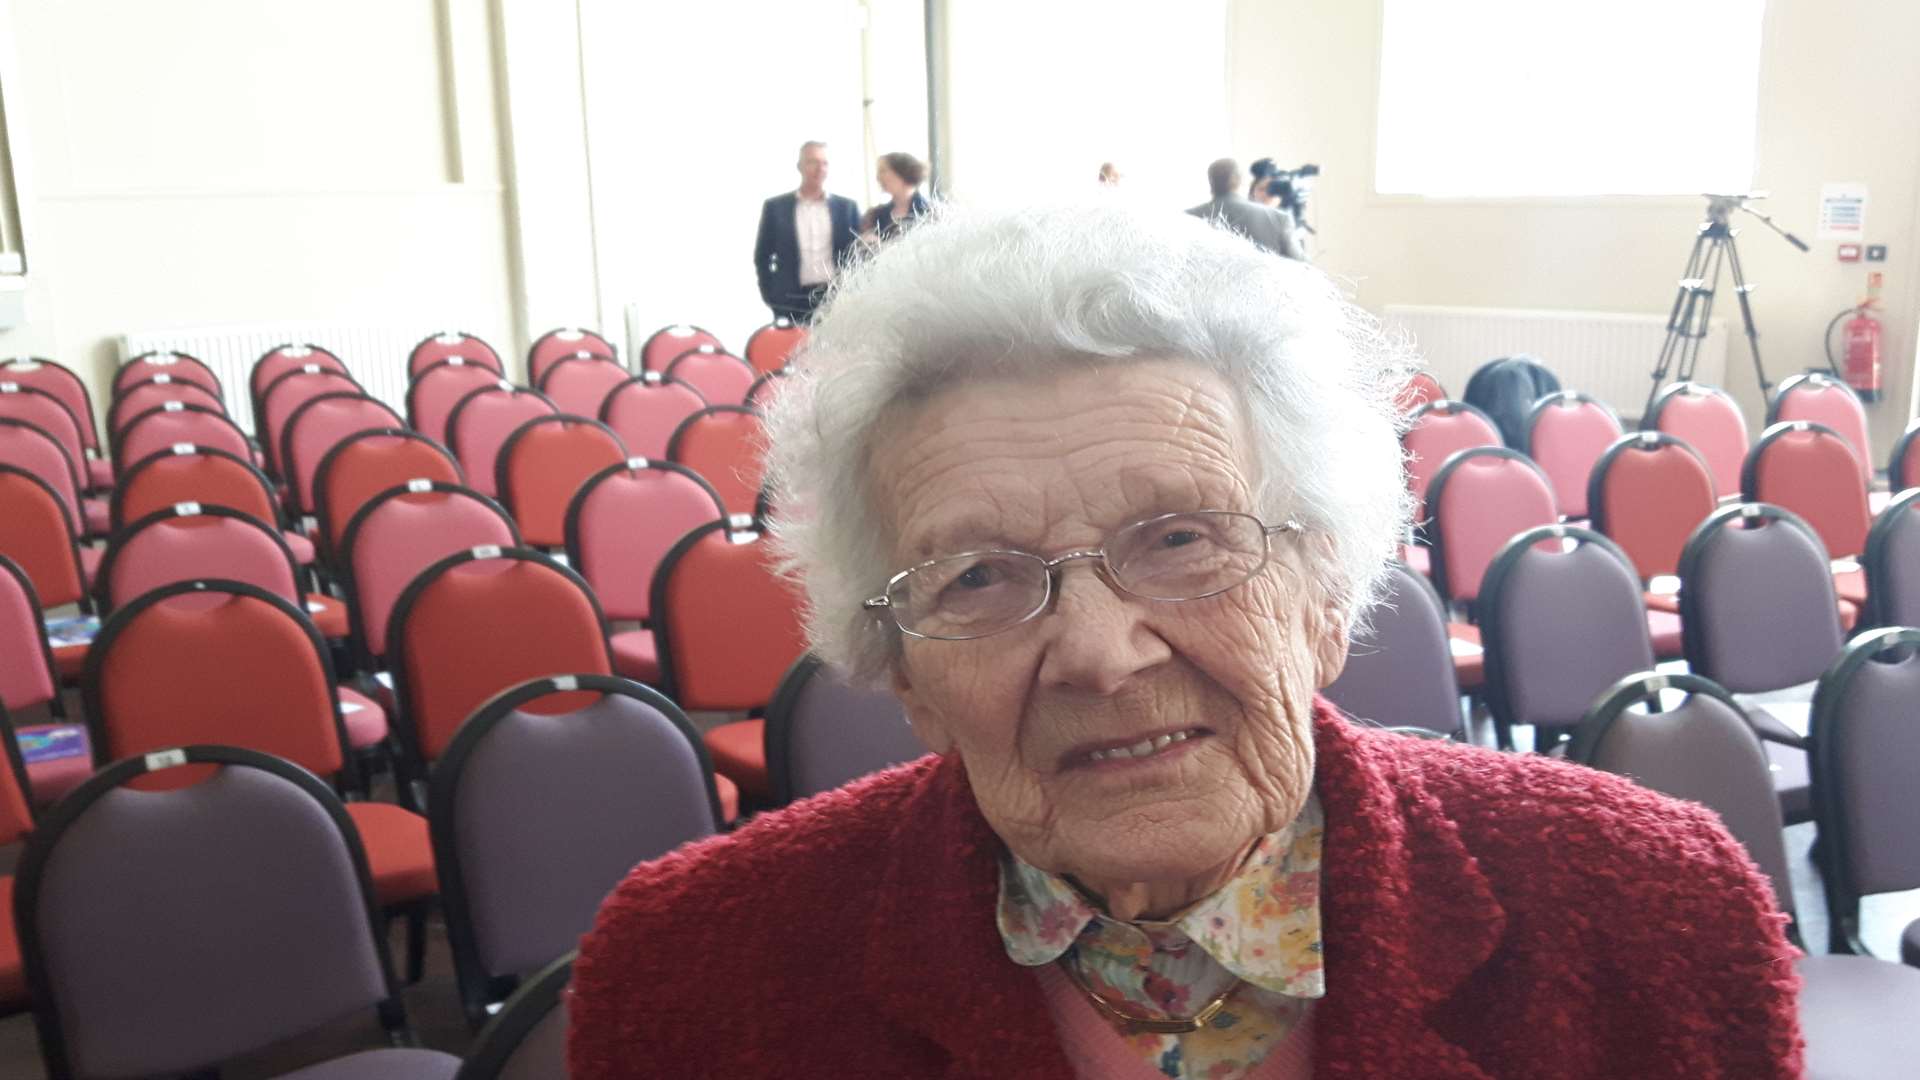 Marjorie Lyle, 91, at the end of the public health services meeting in Canterbury.